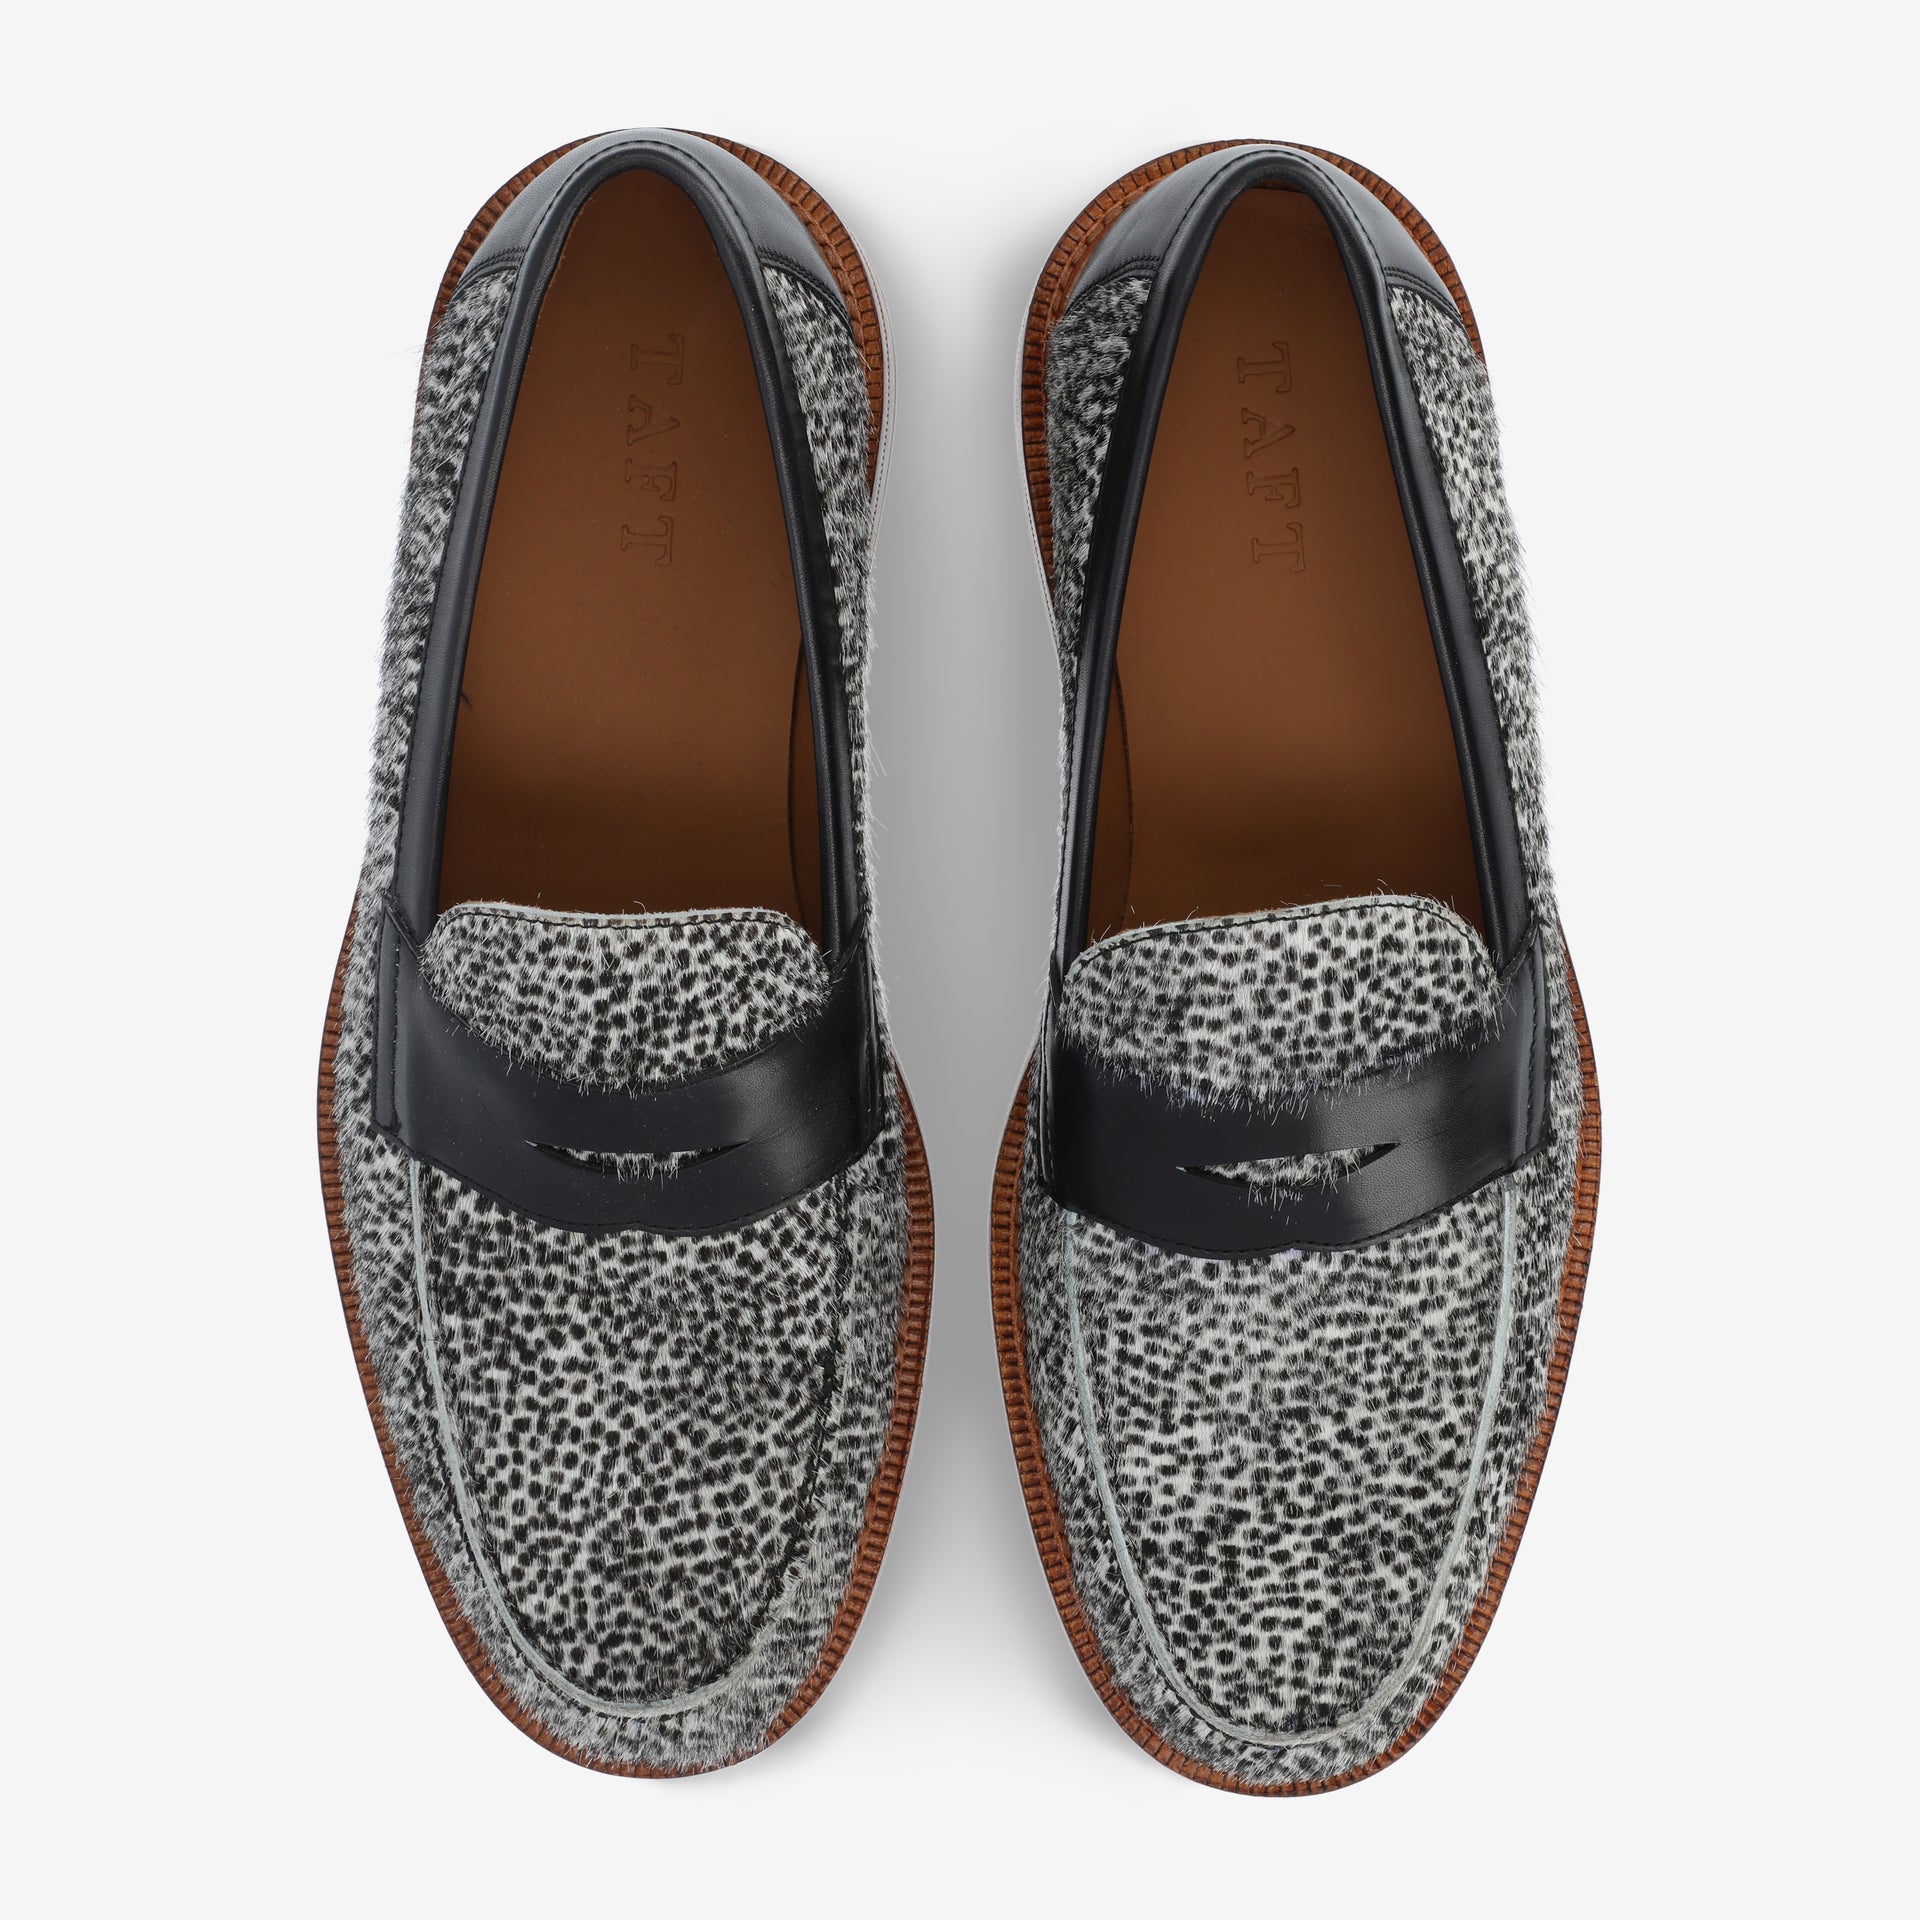 The Fitz Loafer in Rainclouds - Black and White Dot | TAFT